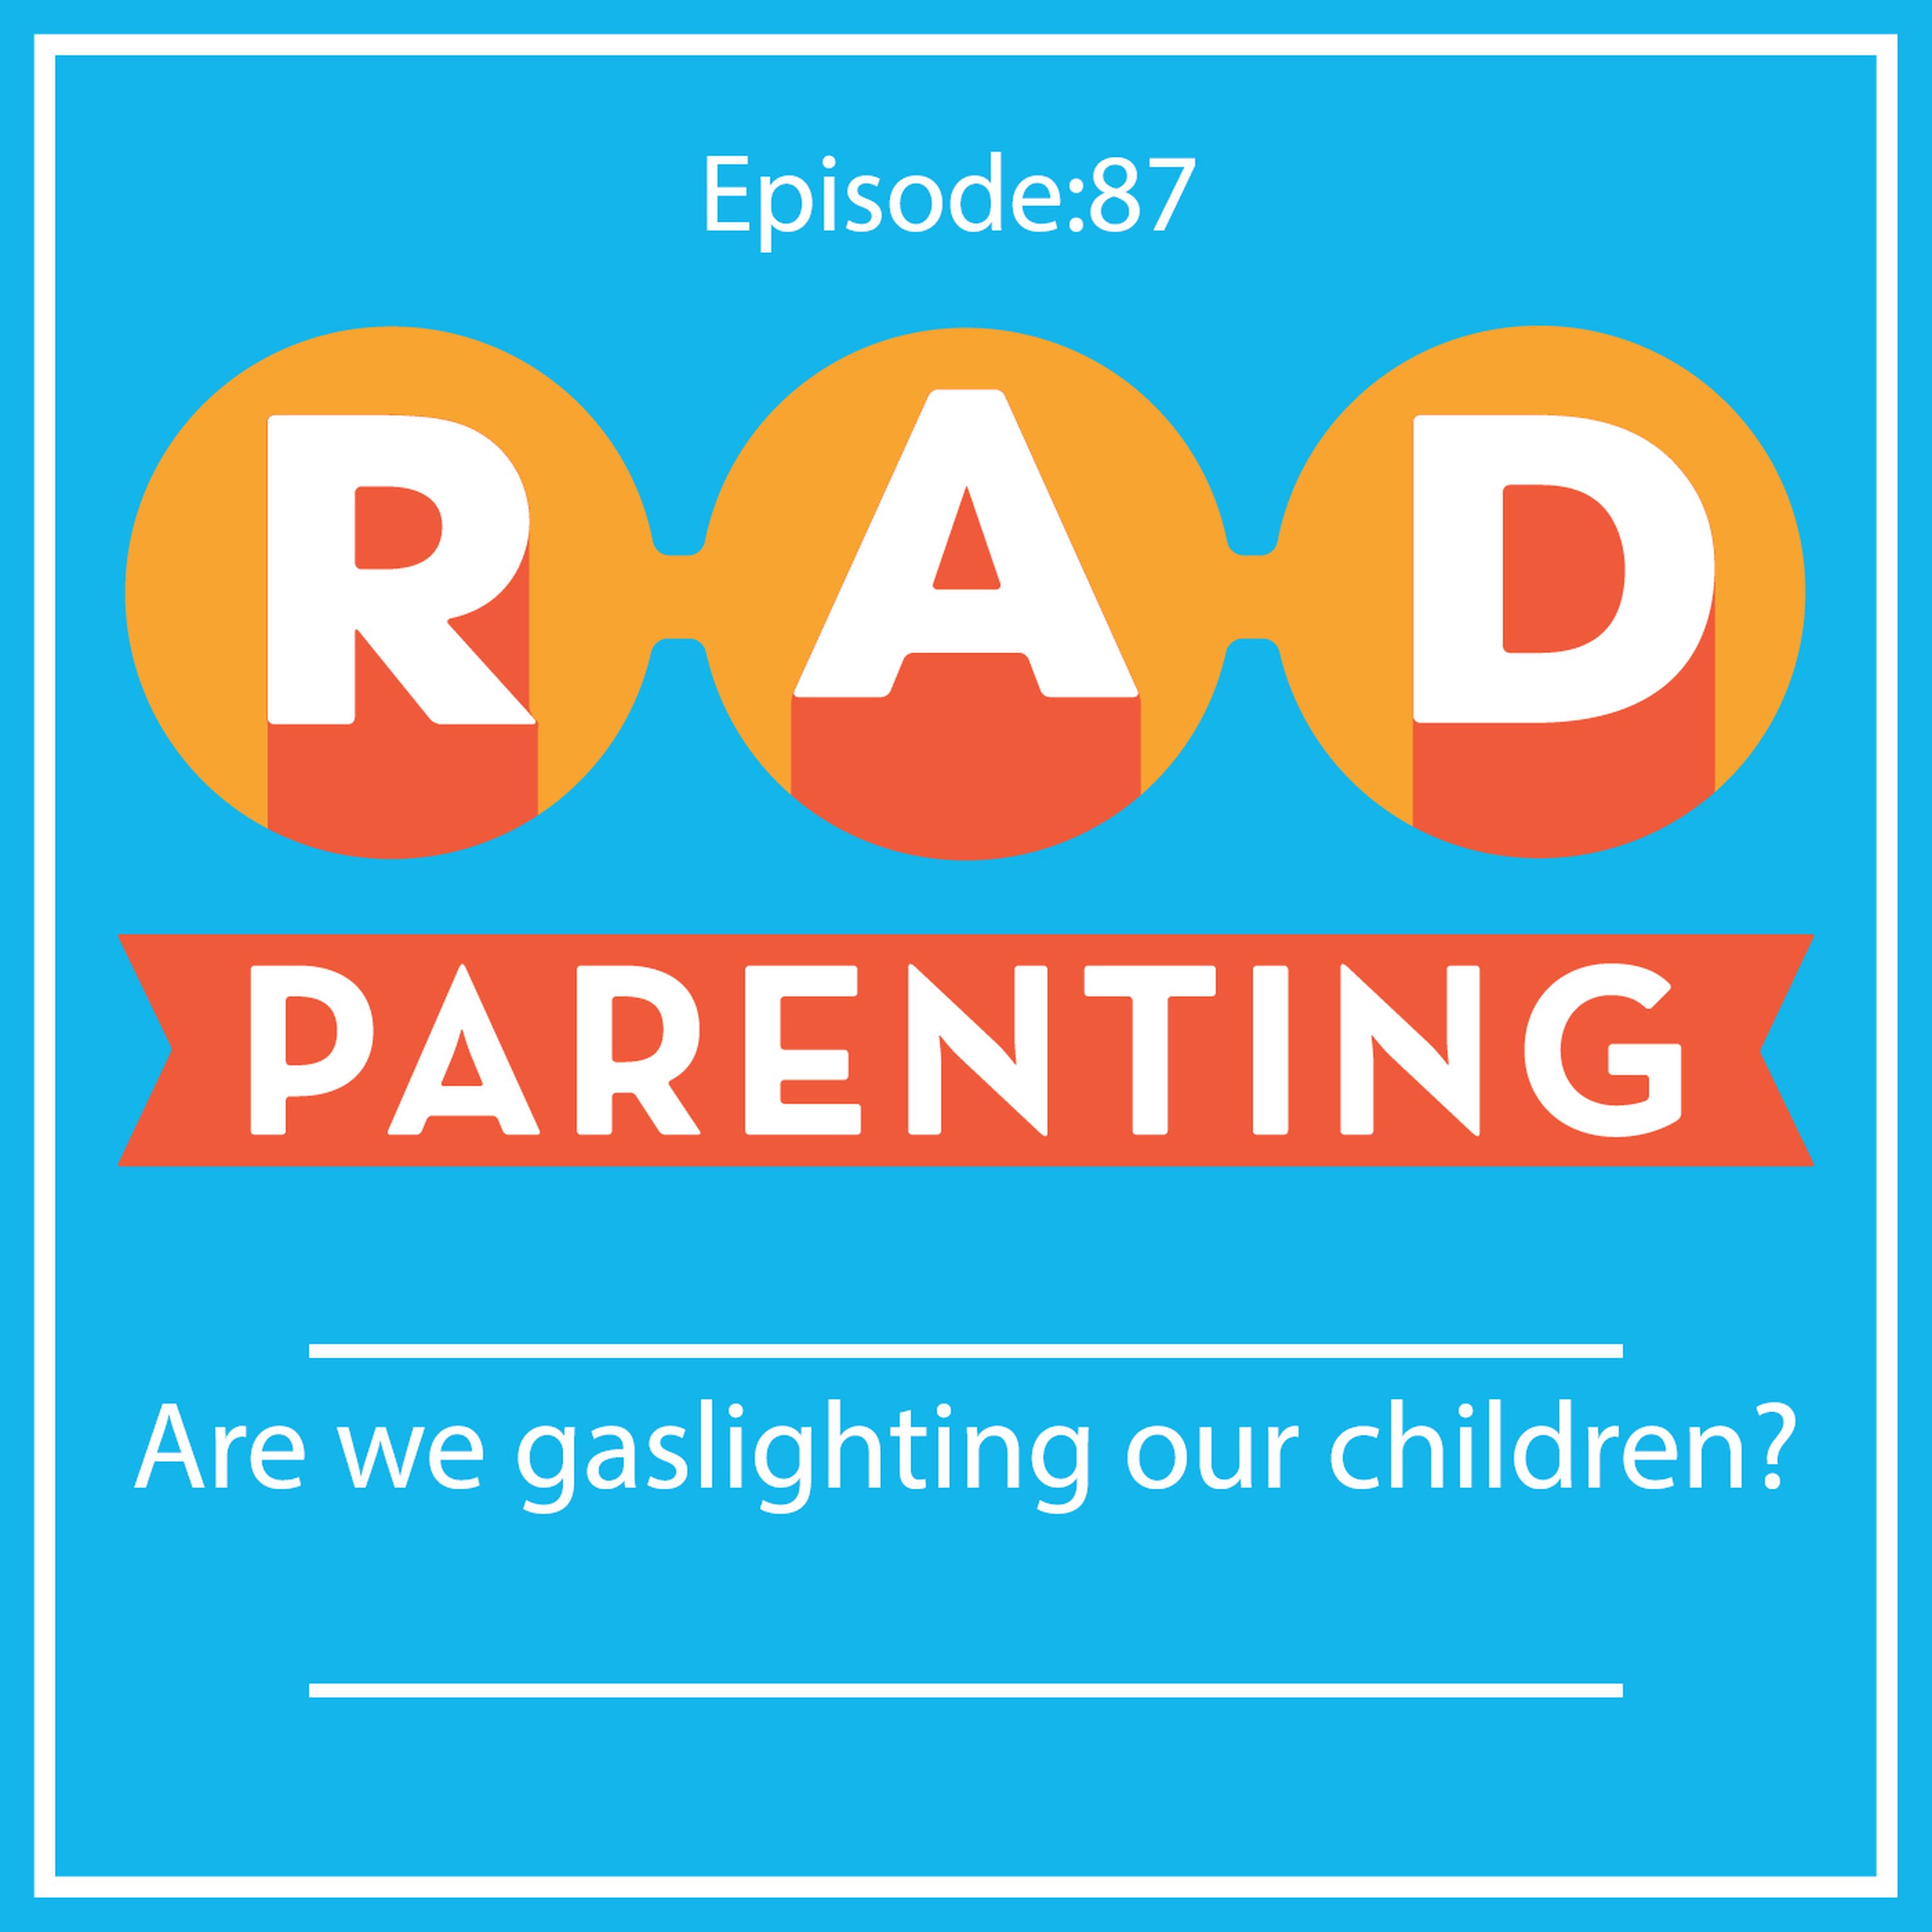 Are we gaslighting our children?